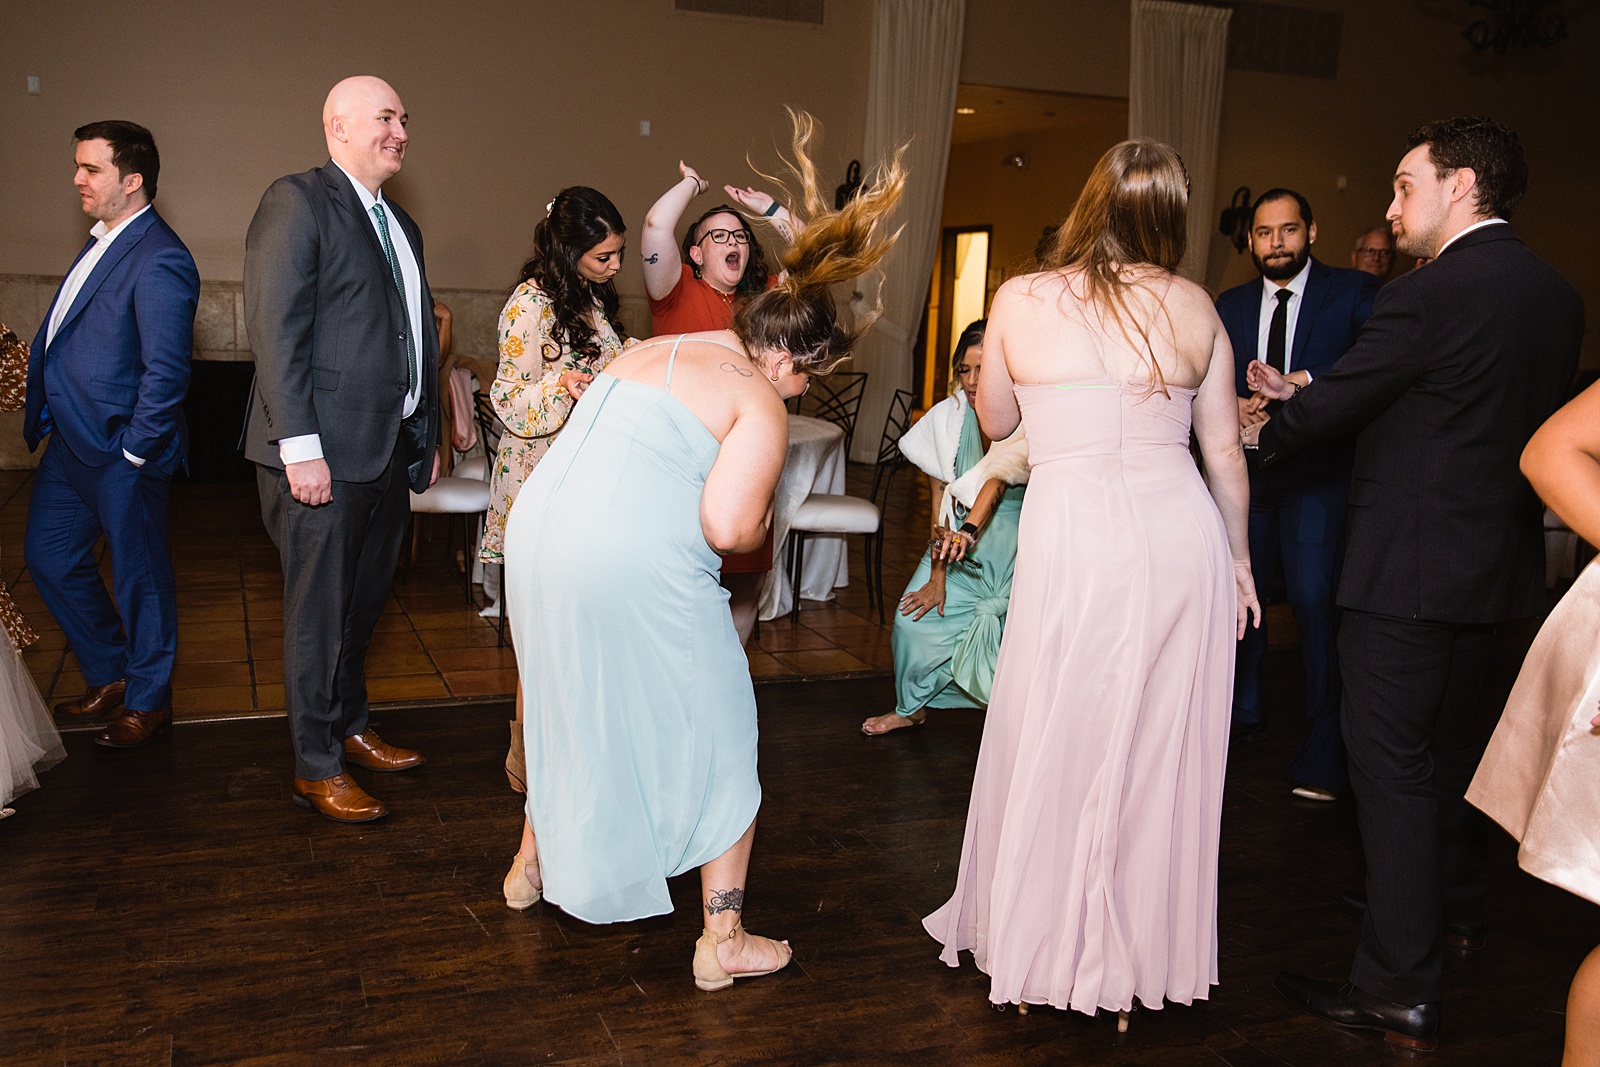 Guests dancing together at Bella Rose Estate wedding reception by Chandler wedding photographer PMA Photography